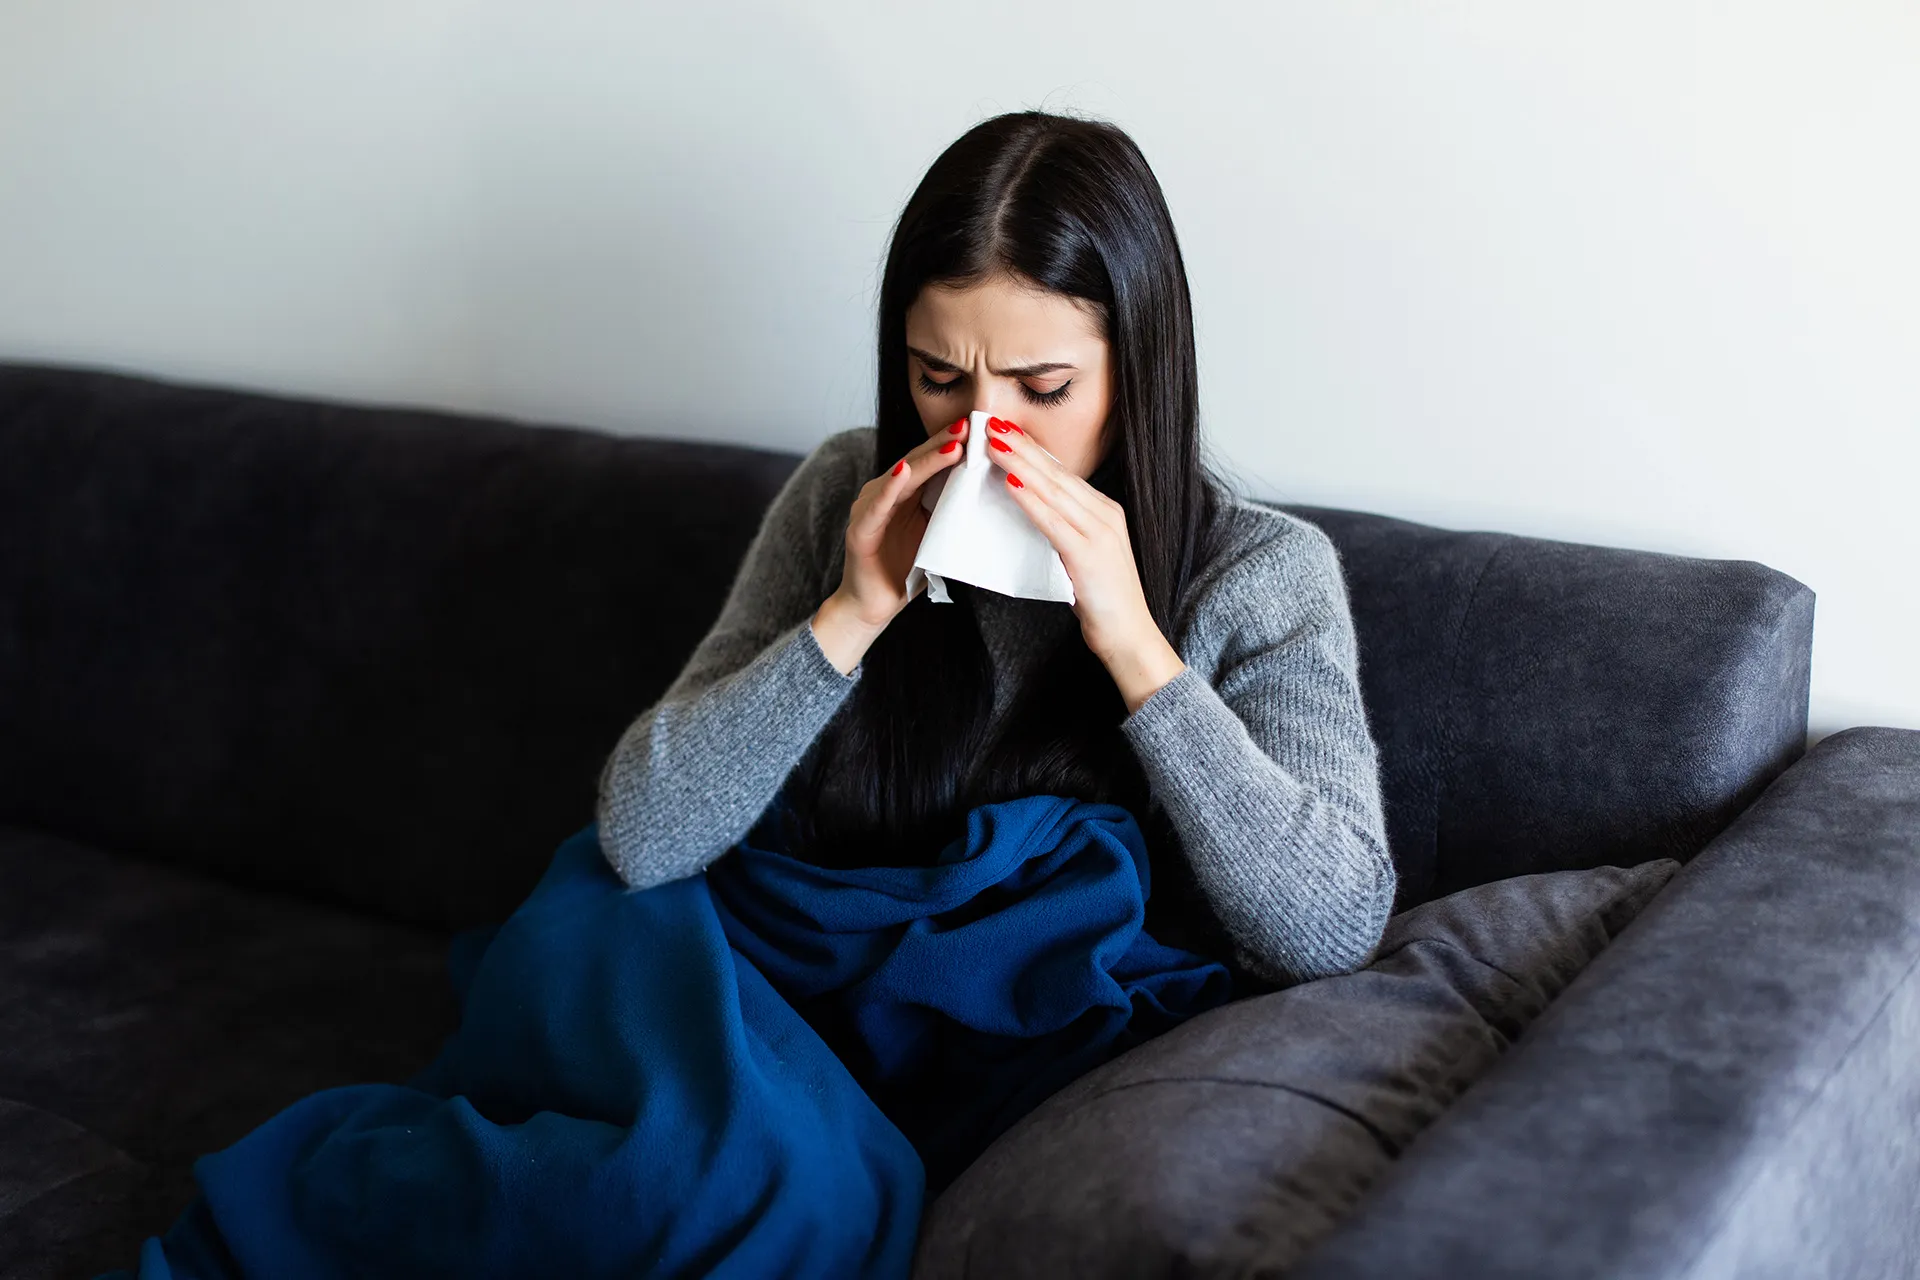 How is covid-19 different from the flu